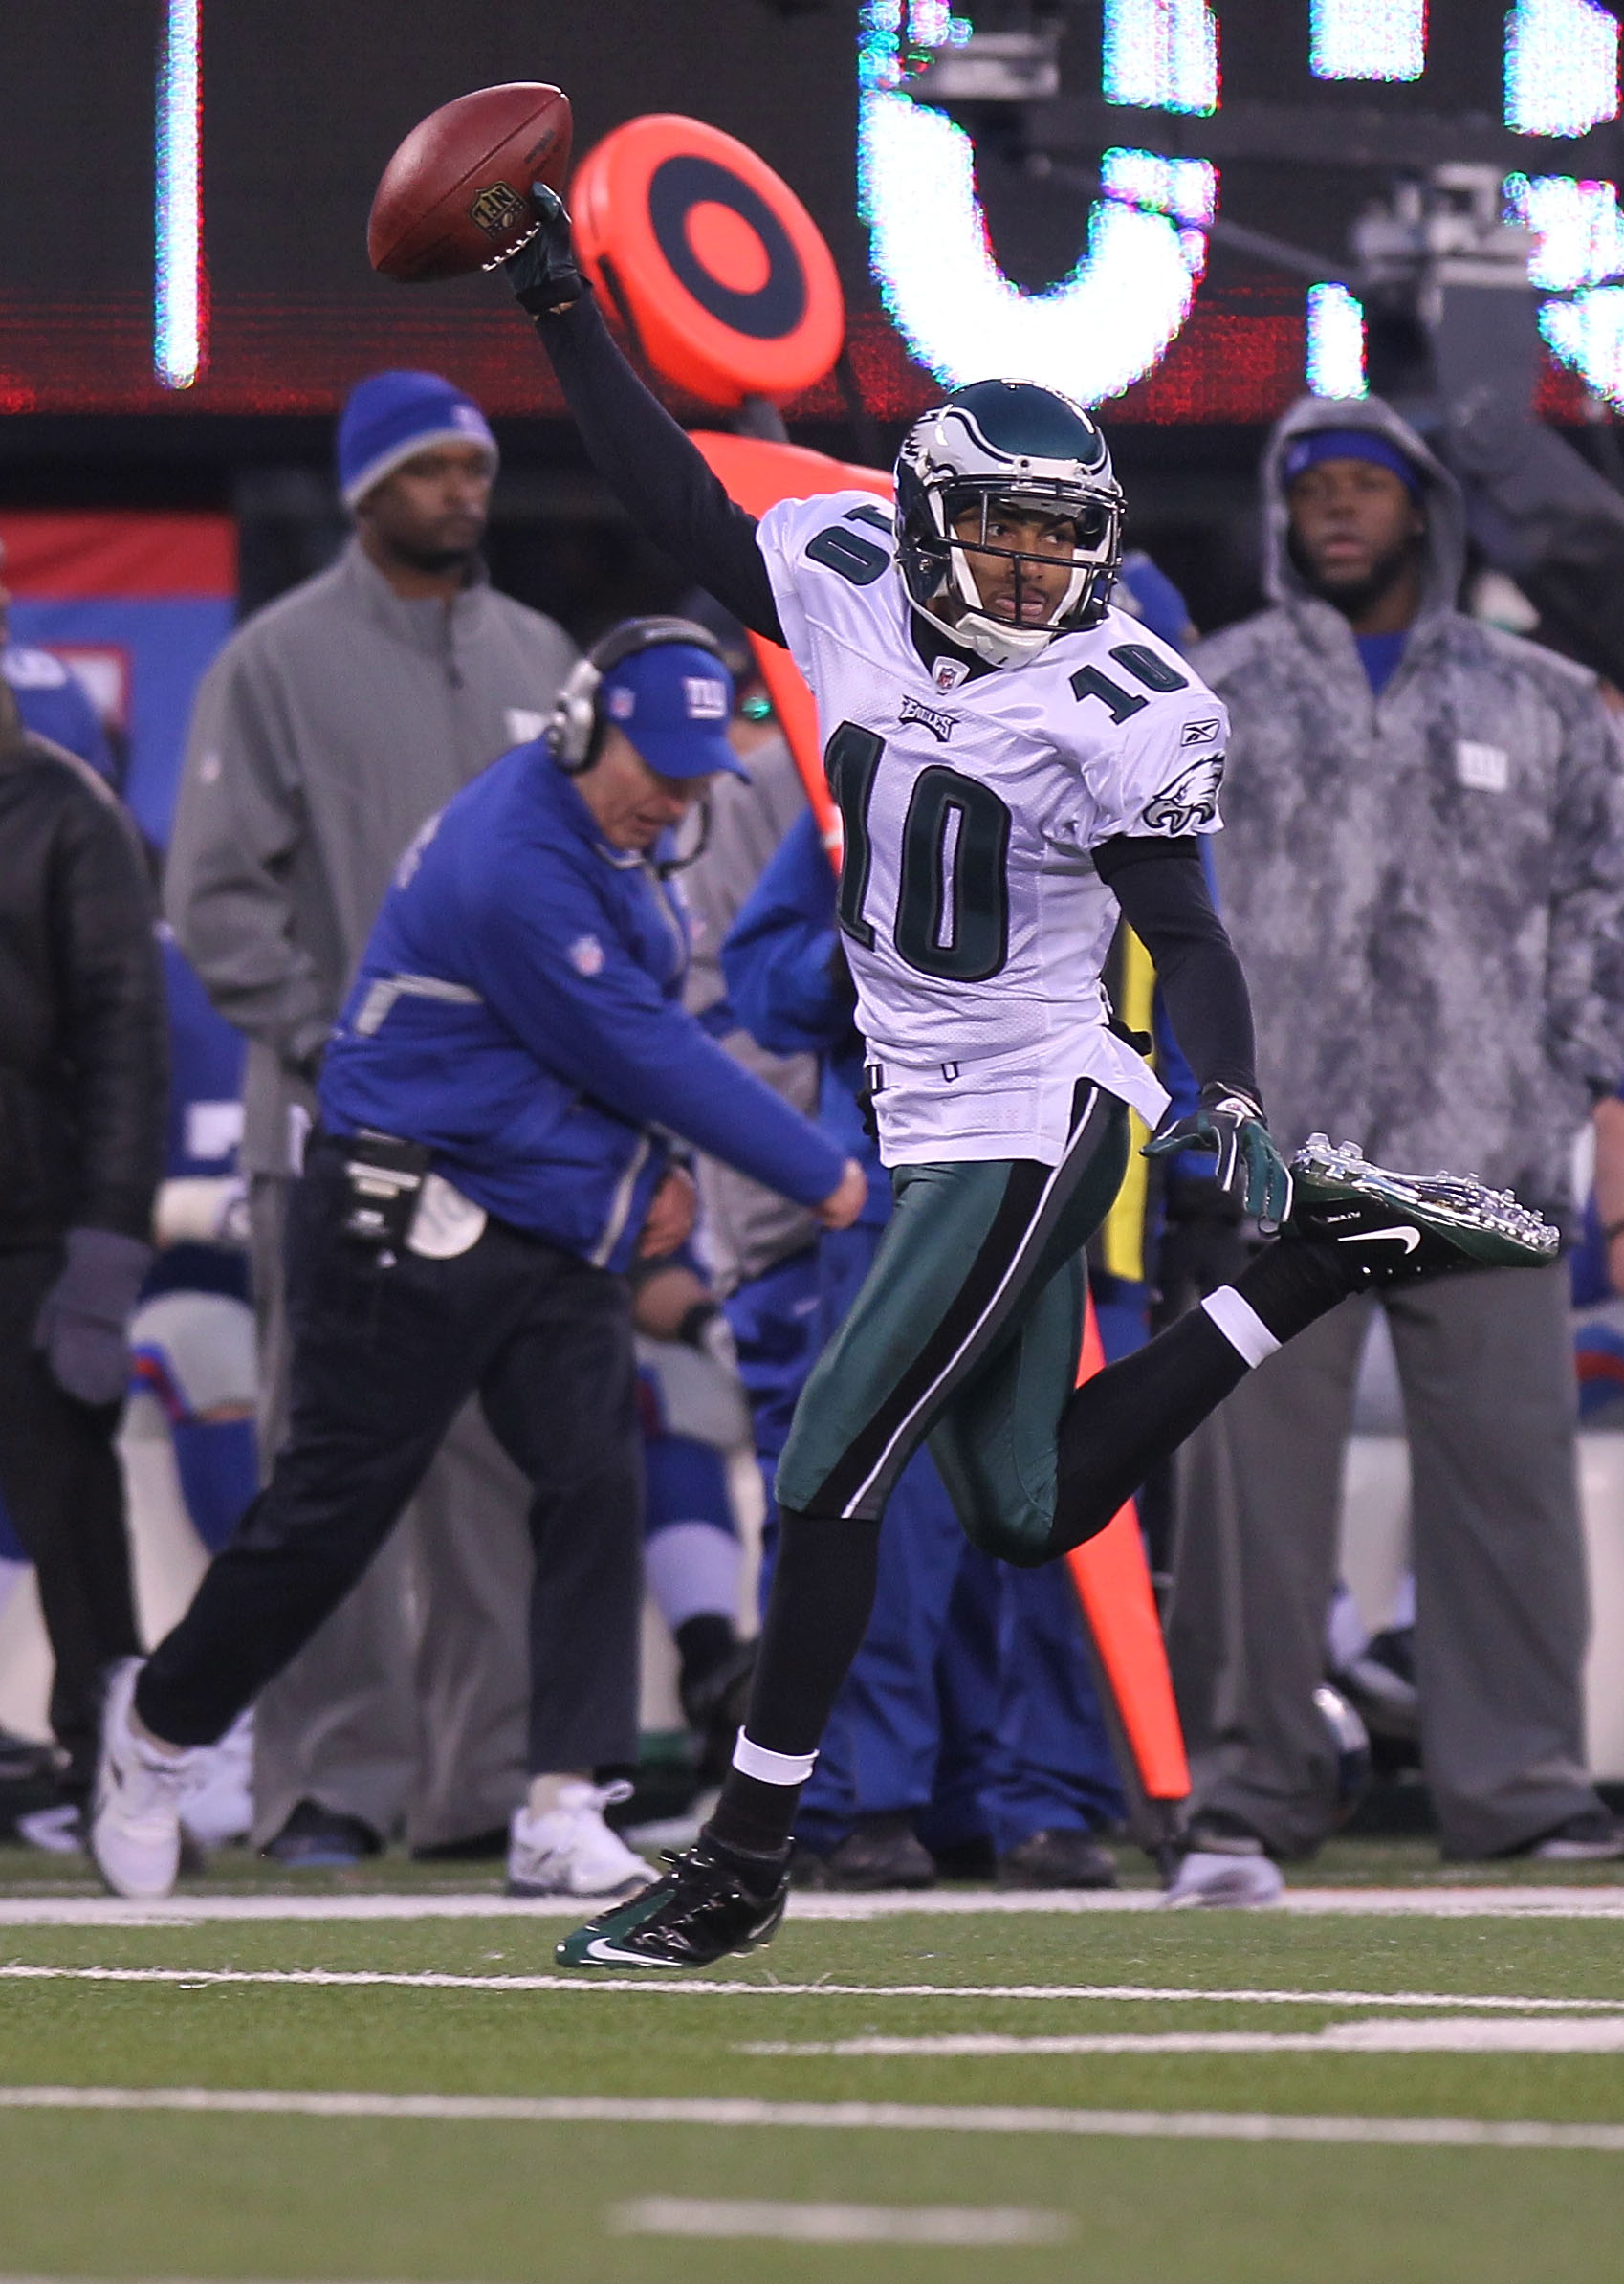 EAST RUTHERFORD, NJ - DECEMBER 19:  DeSean Jackson #10 of the Philadelphia Eagles runs in the game winning touchdown on a punt return against the New York Giants at New Meadowlands Stadium on December 19, 2010 in East Rutherford, New Jersey.  (Photo by Ni